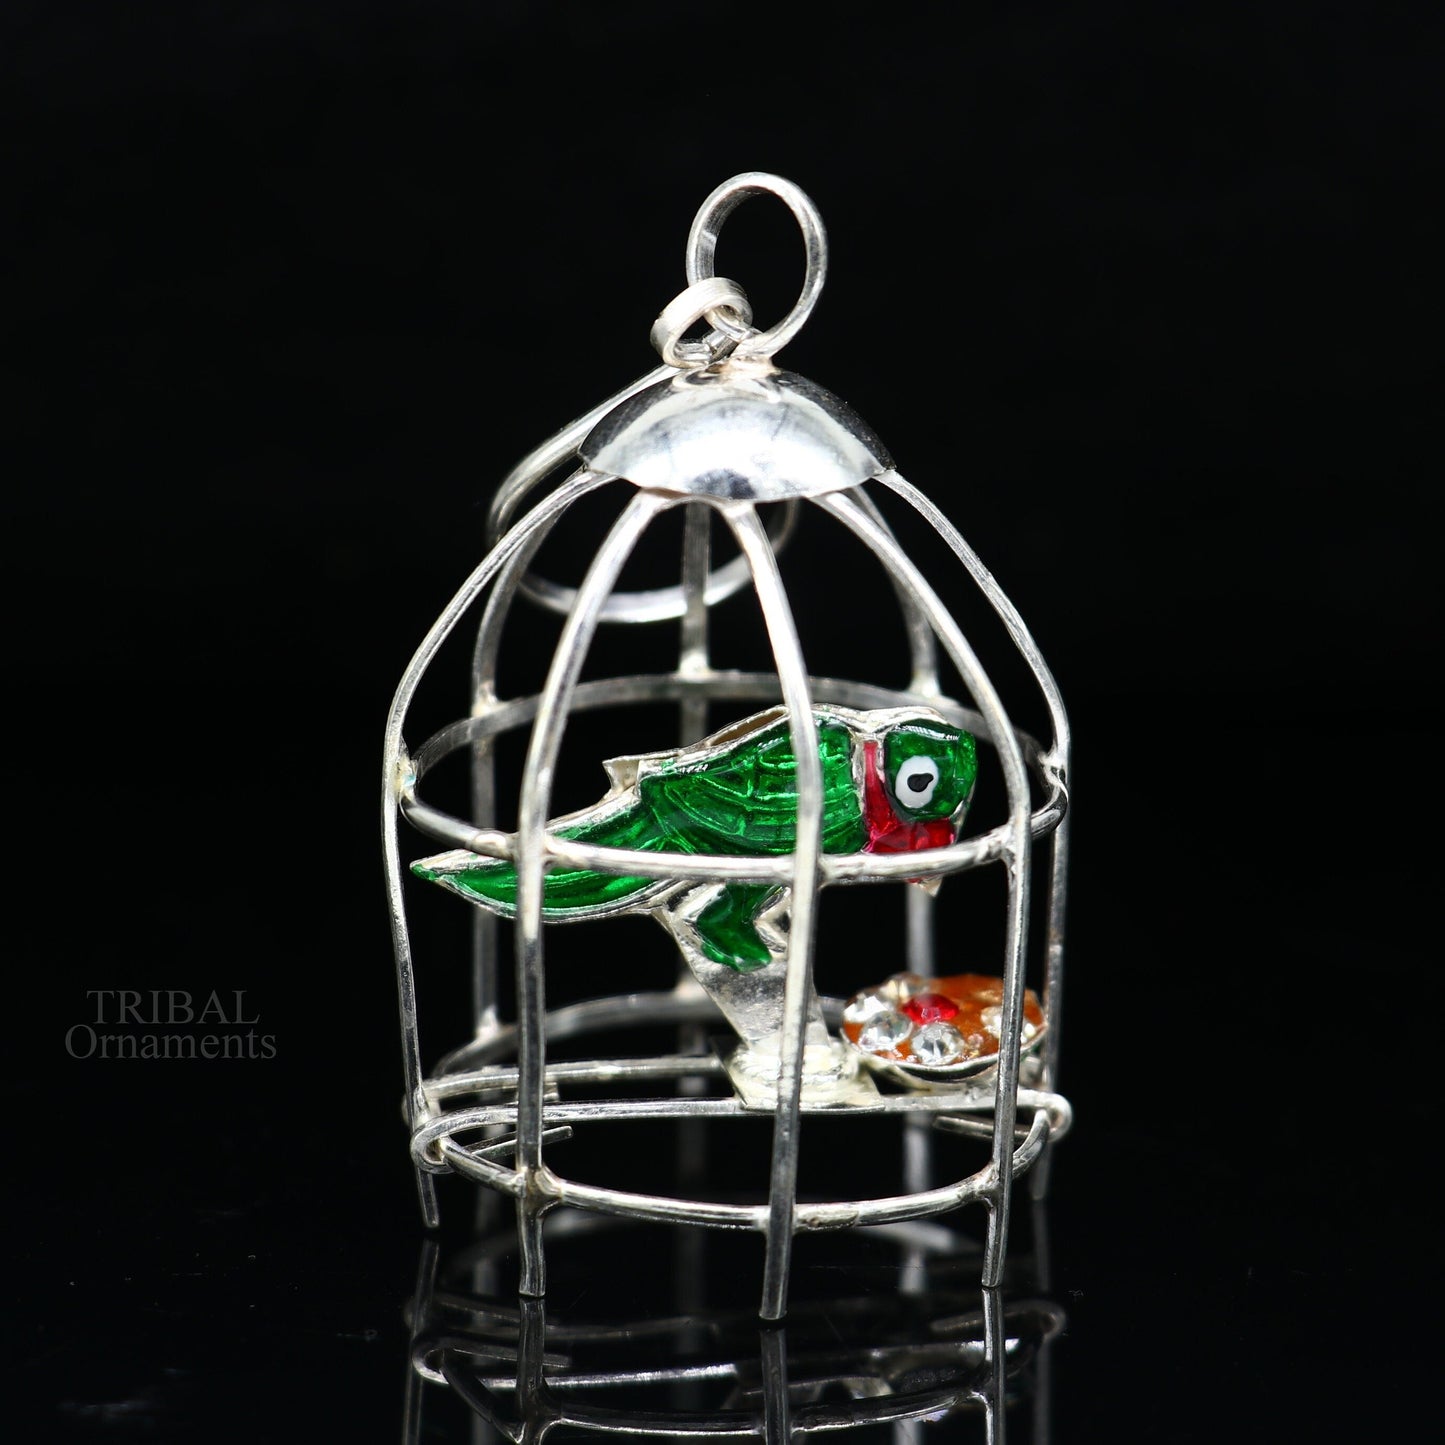 Solid sterling silver handmade toy for idlo krishna, silver parrot with cage, silver article for gifting to God or idol Krishna,  su691 - TRIBAL ORNAMENTS